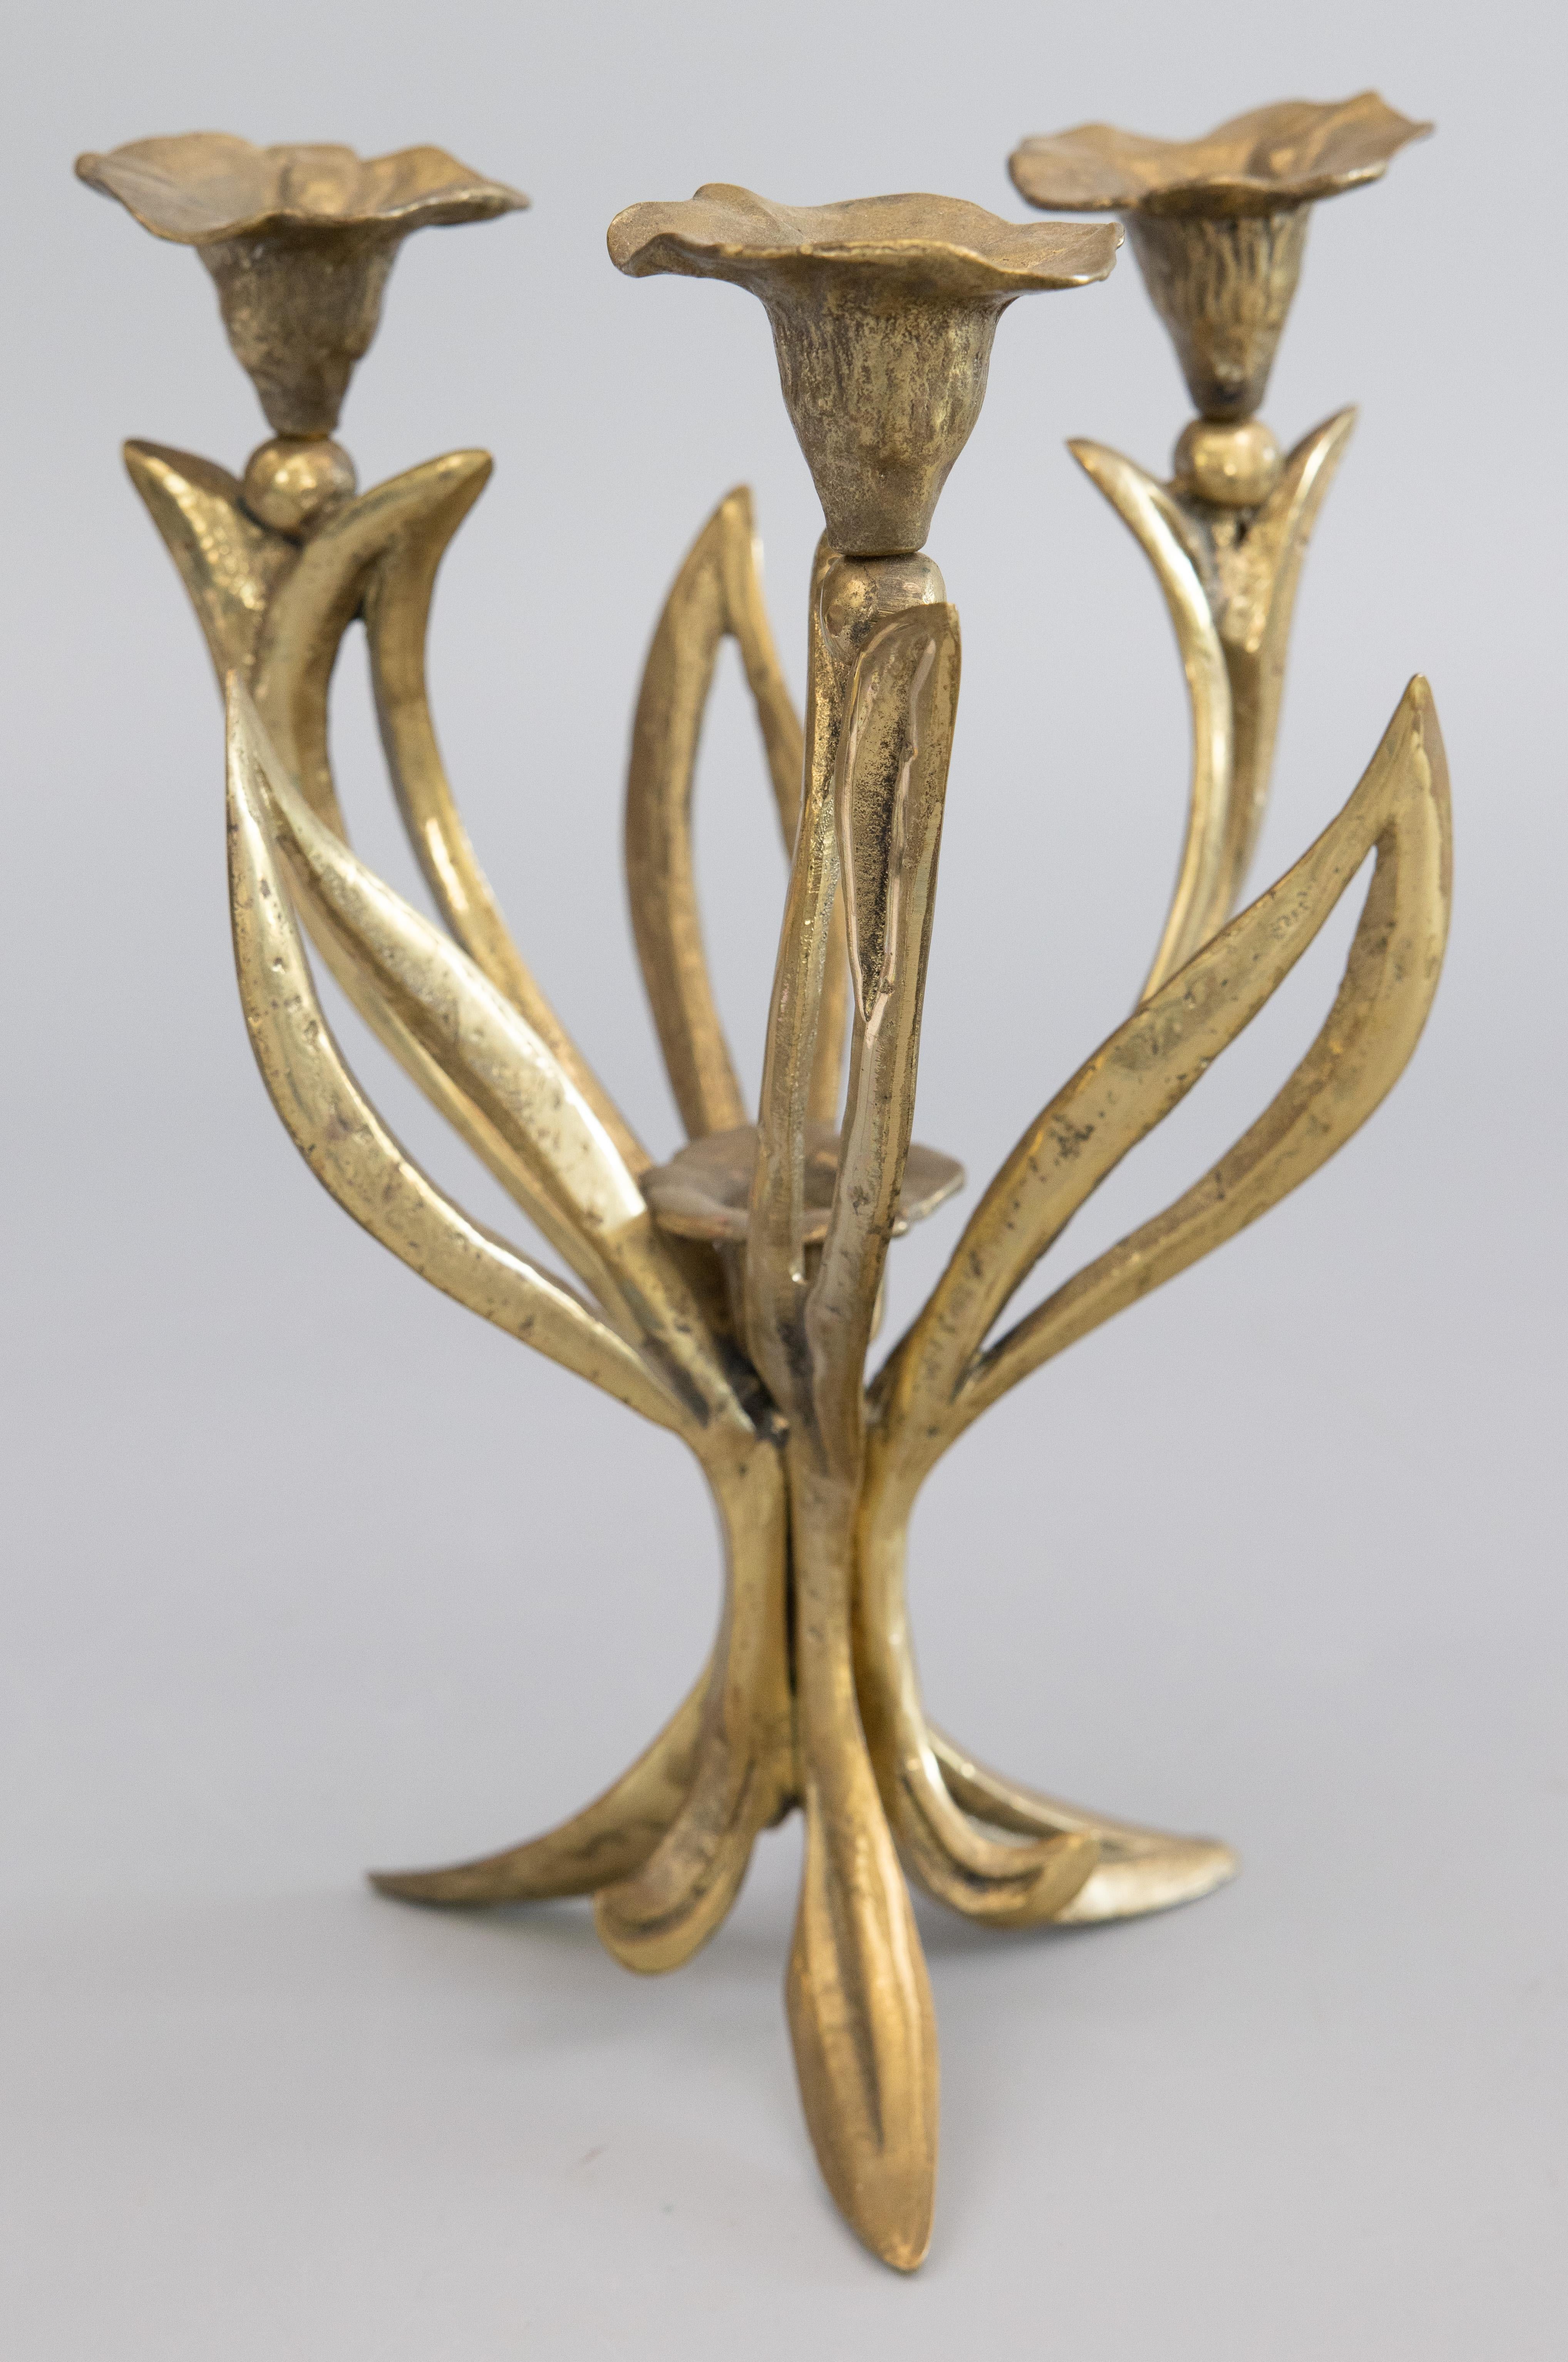 A gorgeous antique Art Nouveau French solid brass candelabra with four candle holders. This stylish candelabra is solid and heavy, weighing a substantial 3 lbs 10 oz, with a beautiful floral design depicting scrolling leaves and flower candle cups